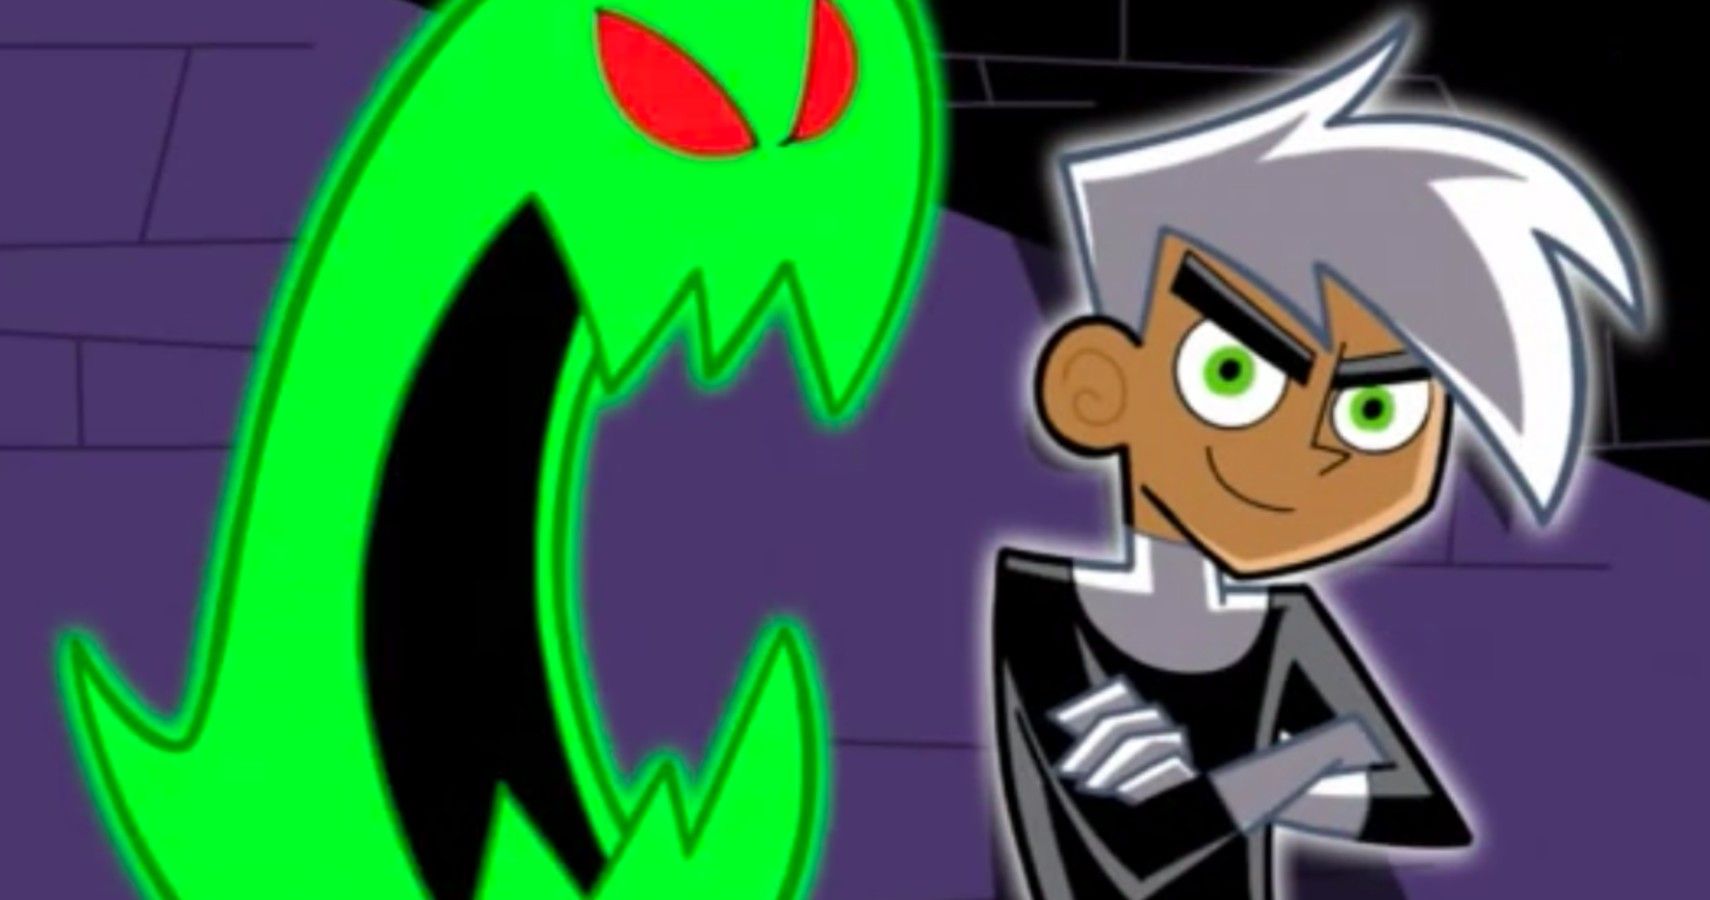 Danny Phantom: 16 Facts You Didn't Know About The Hit Nickelodeon Show